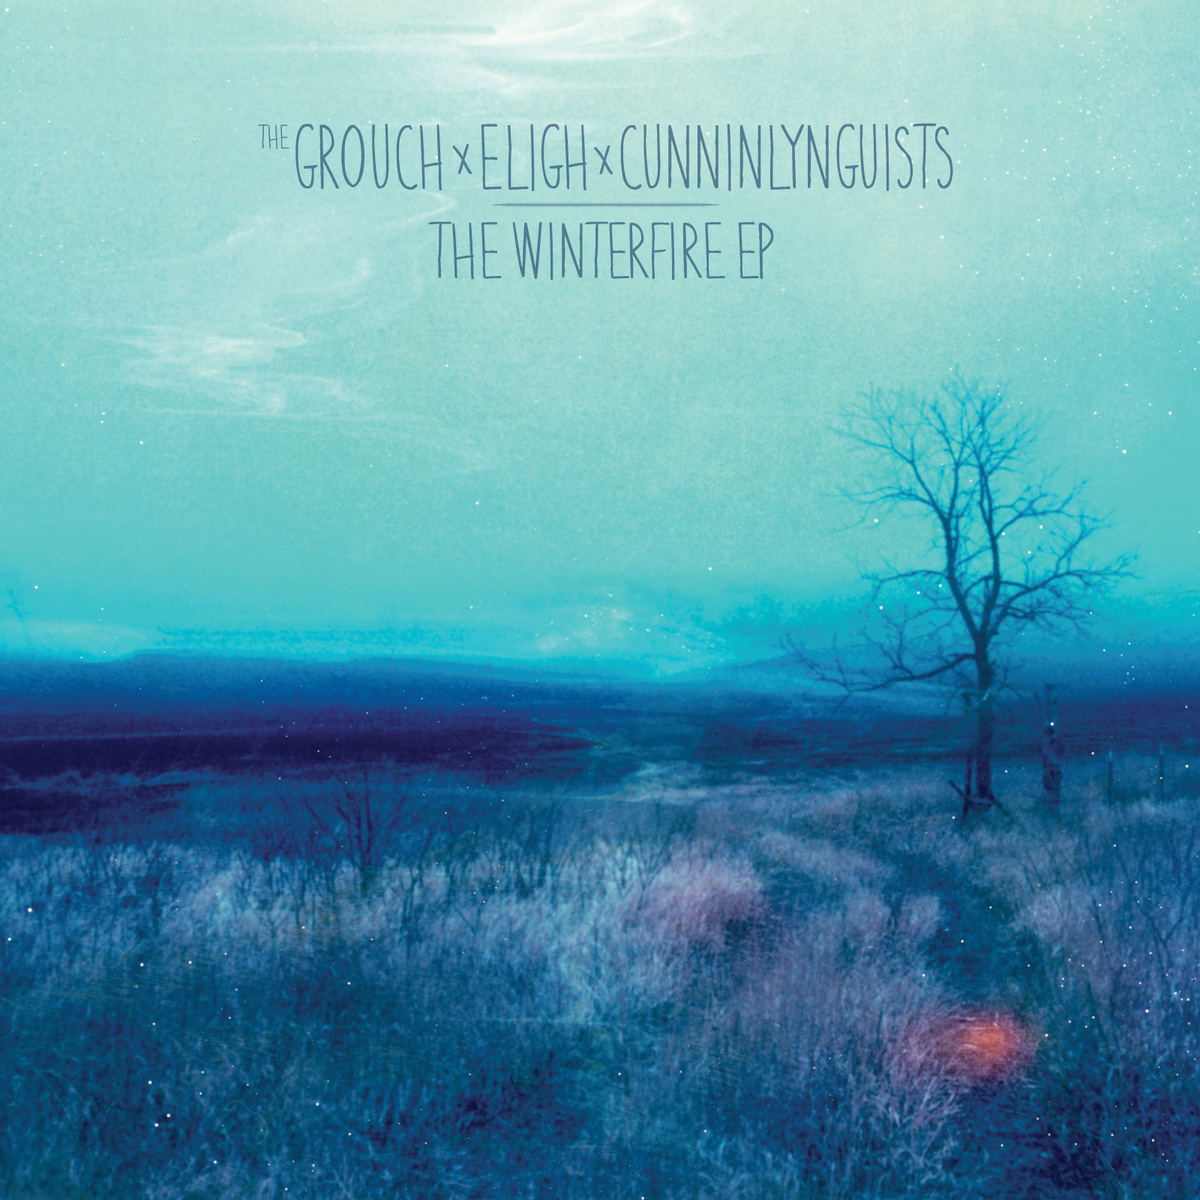 Cunninlynguists__the_grouch___eligh_-_the_winterfire_ep